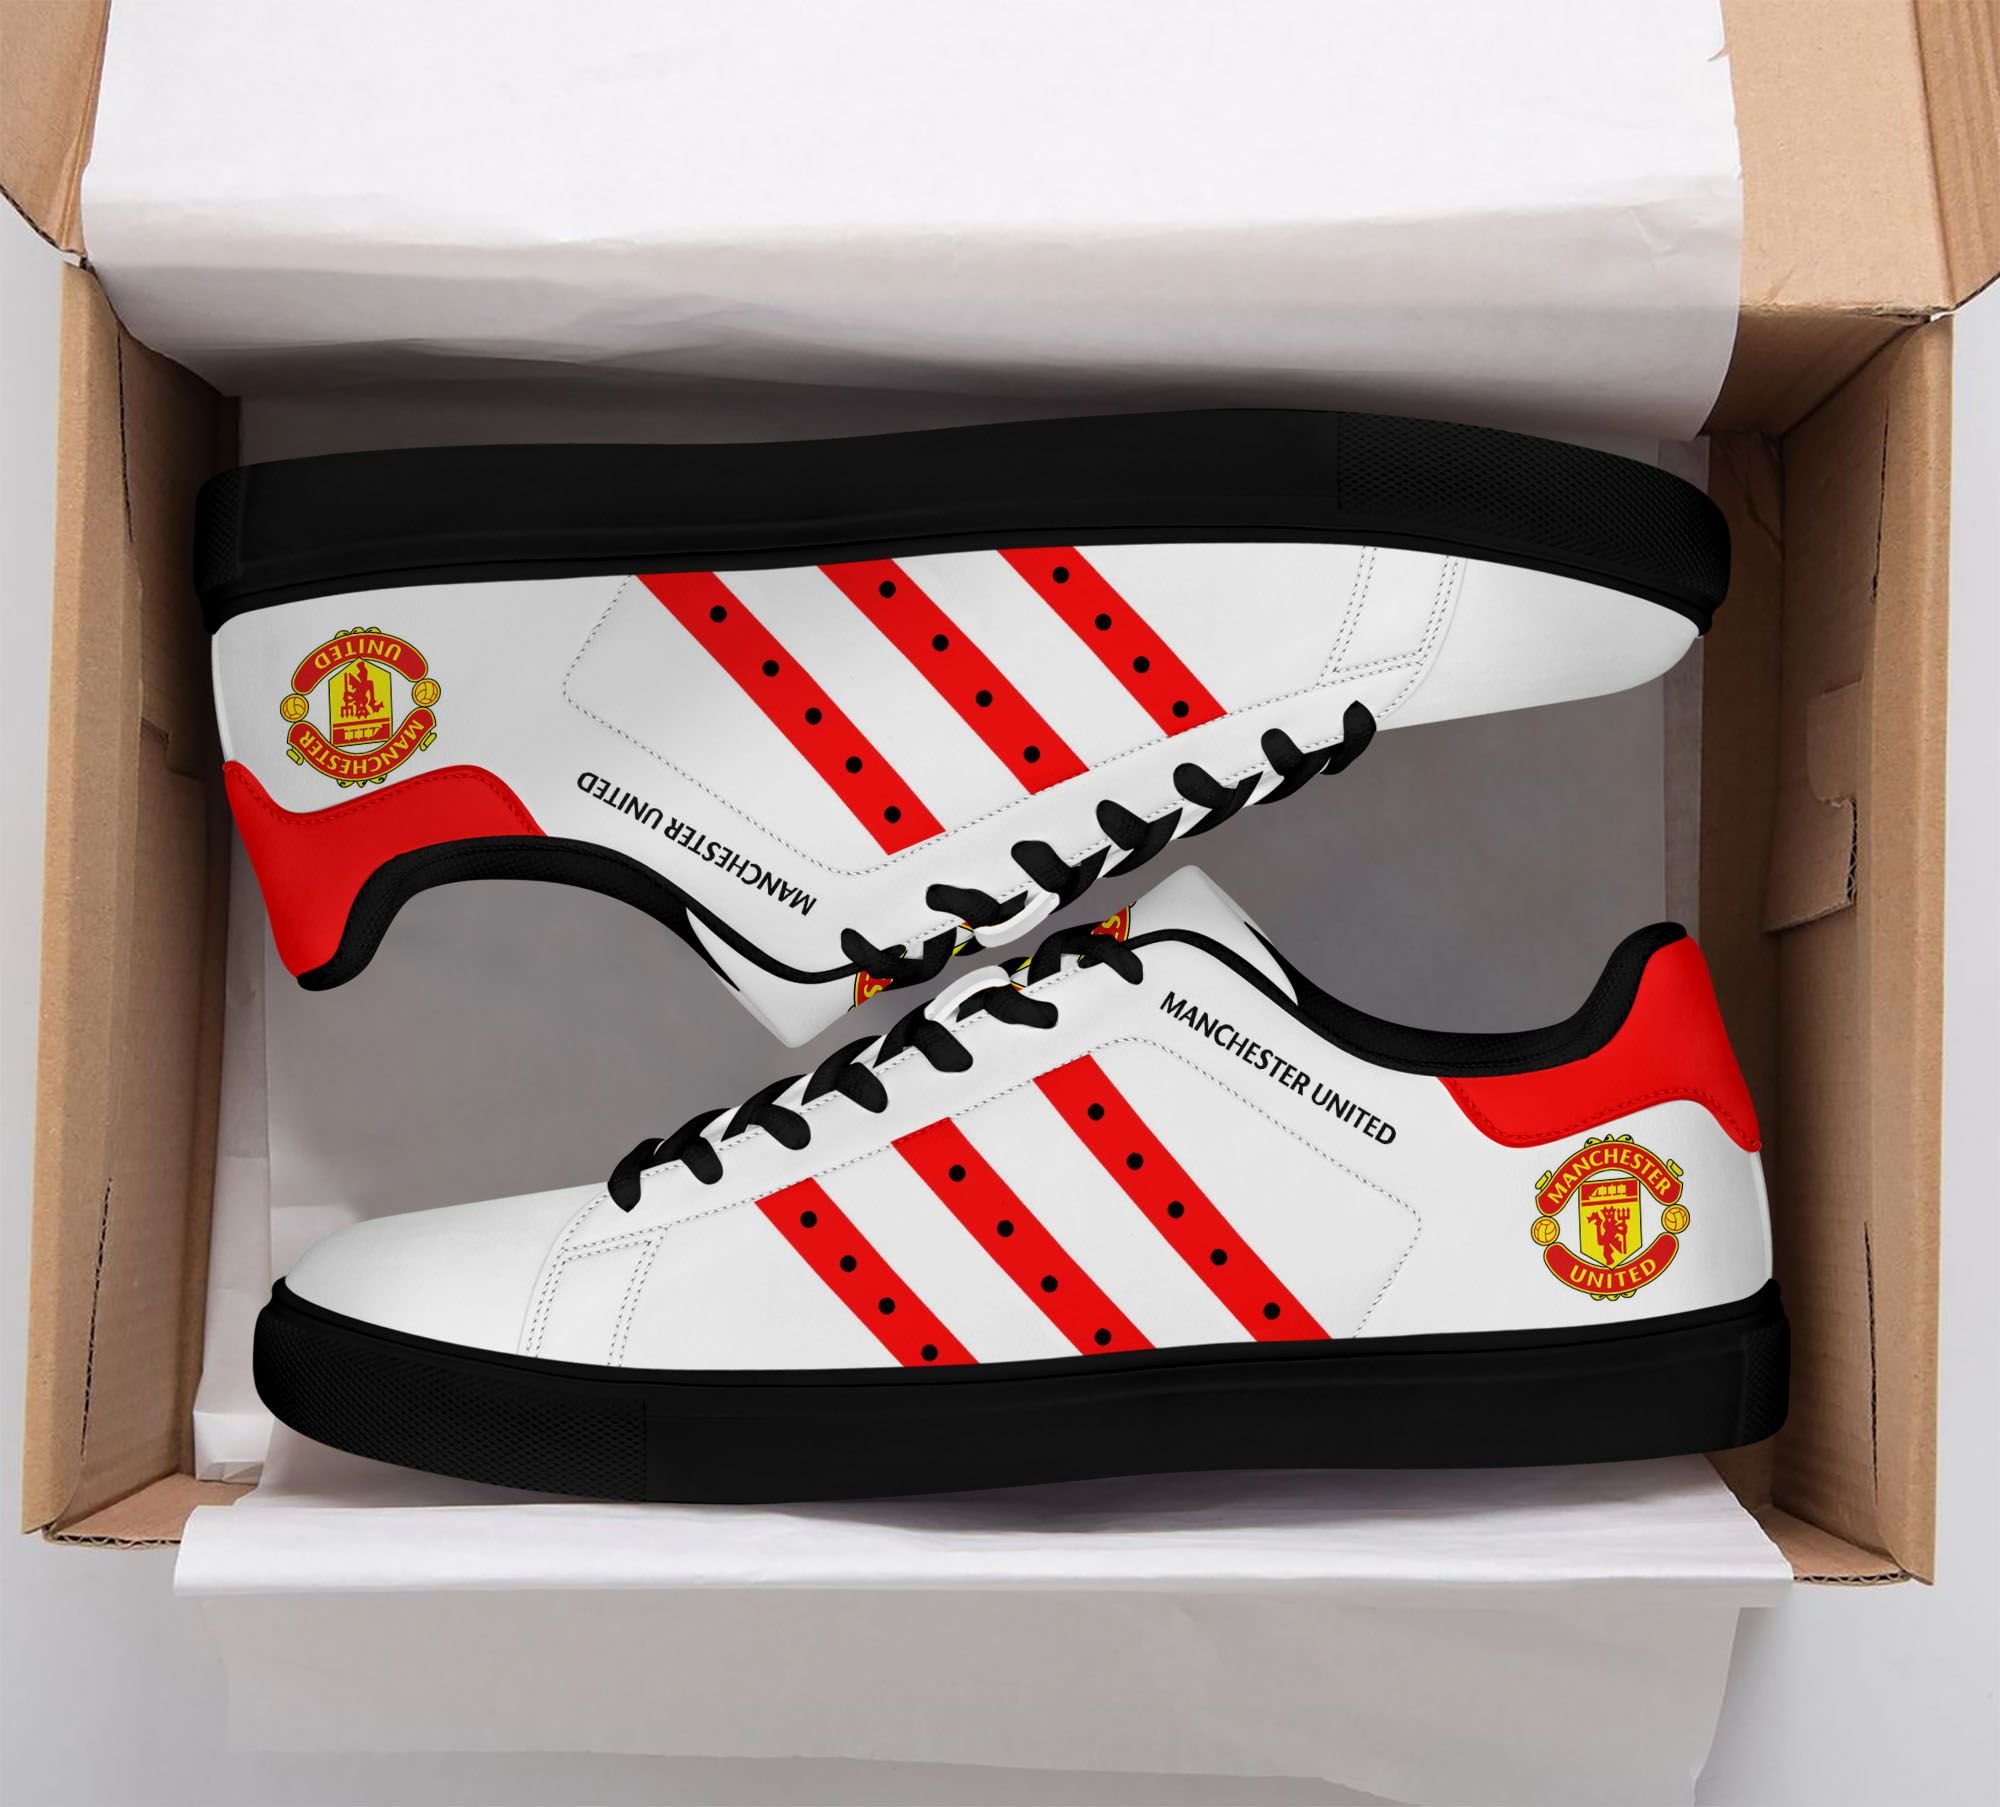 Manchester United stan smith shoes